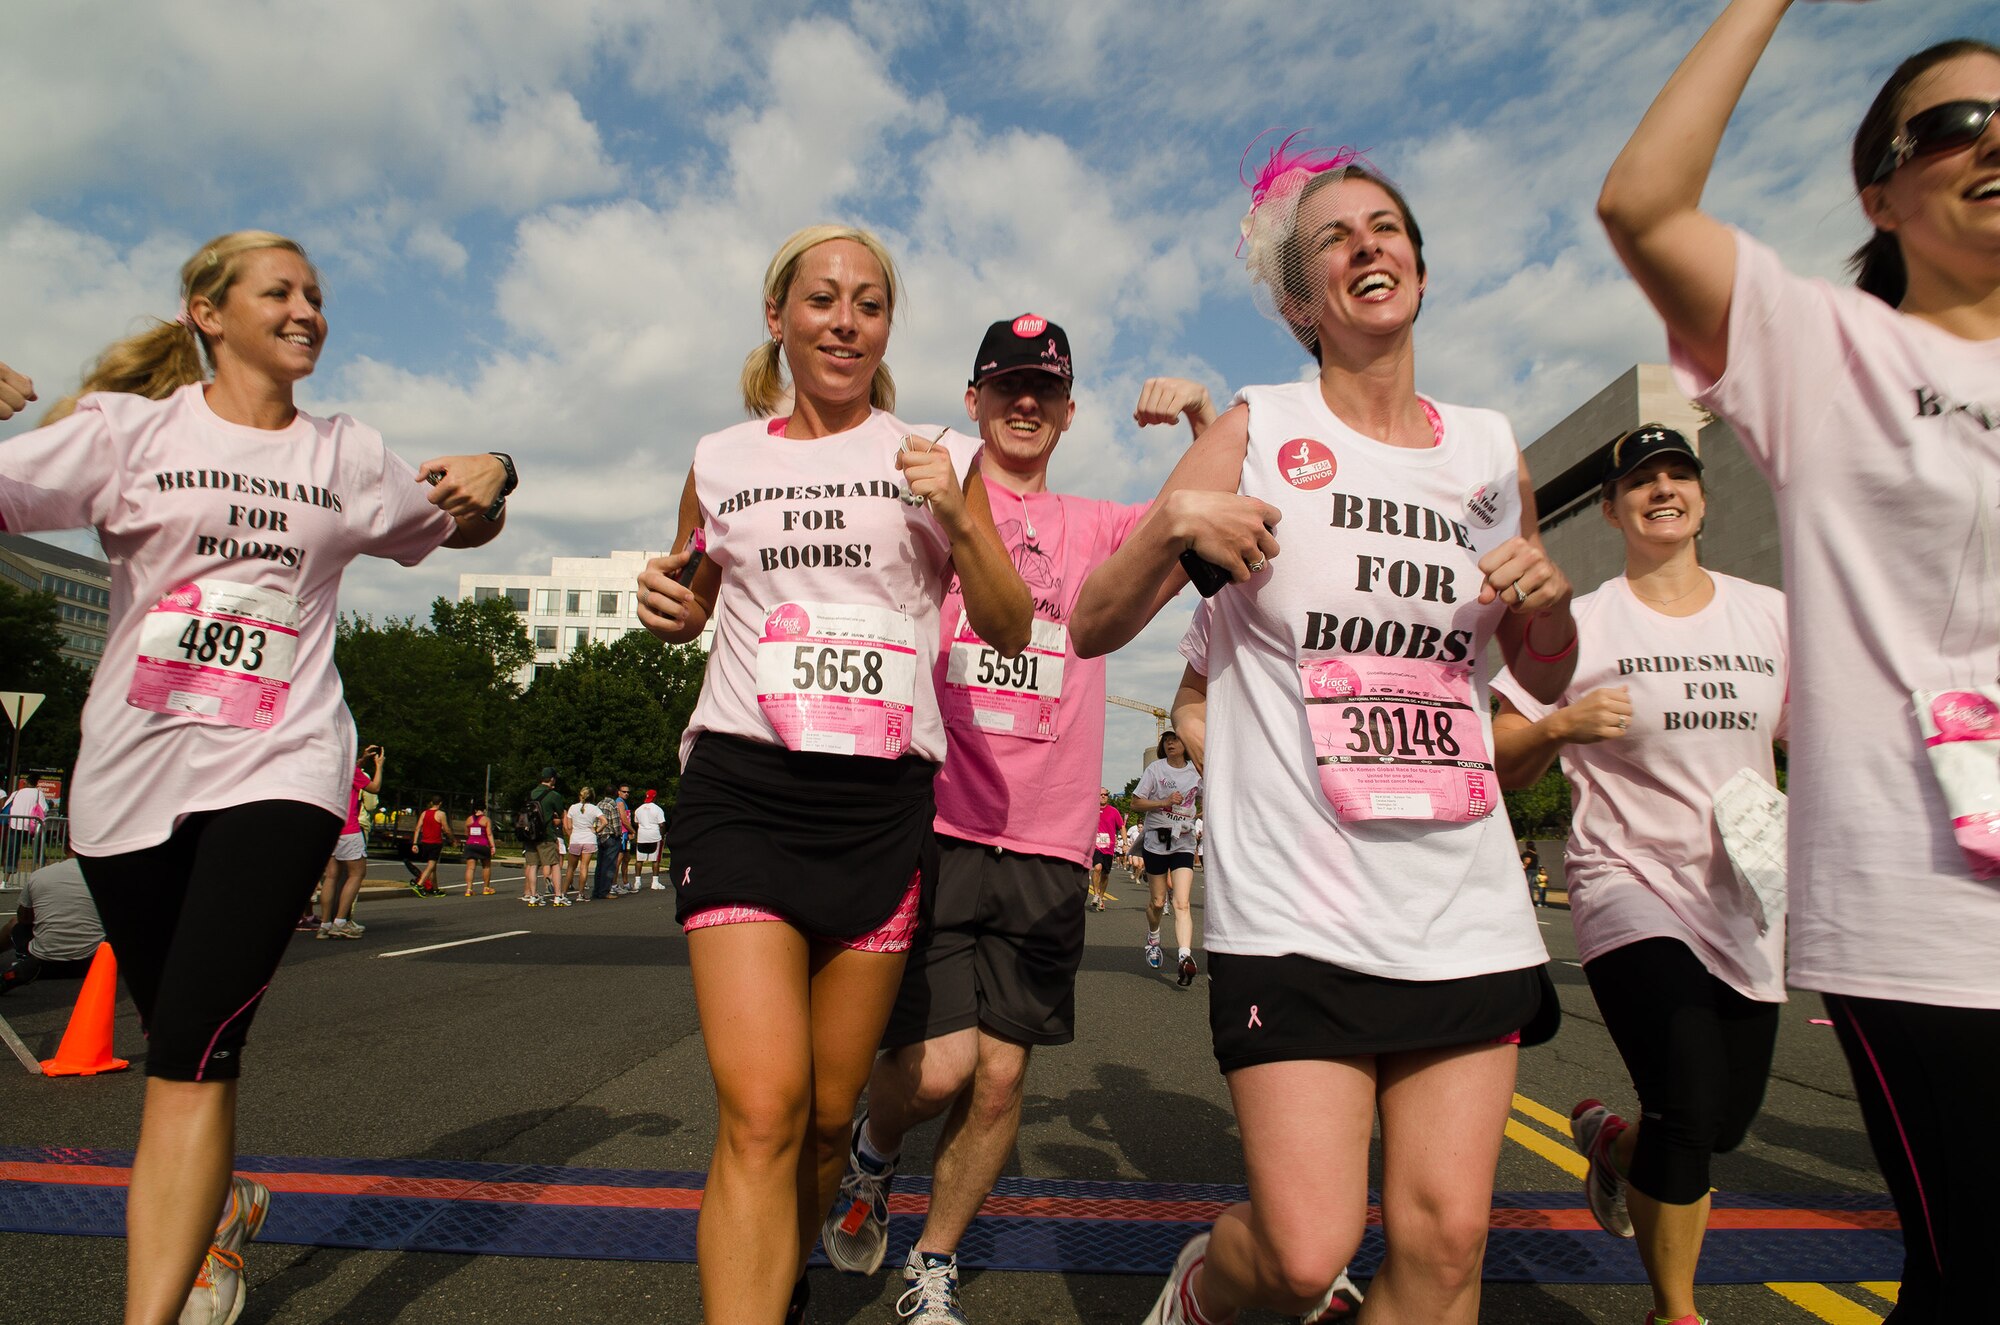 Capt. Candice Adams Ismirle and her bridesmaids cross the finish line of the Susan G. Komen Race for the Cure June 6, 2012, in Washington, D.C. Ismirle and friends completed the 5K race on the morning of her wedding. 